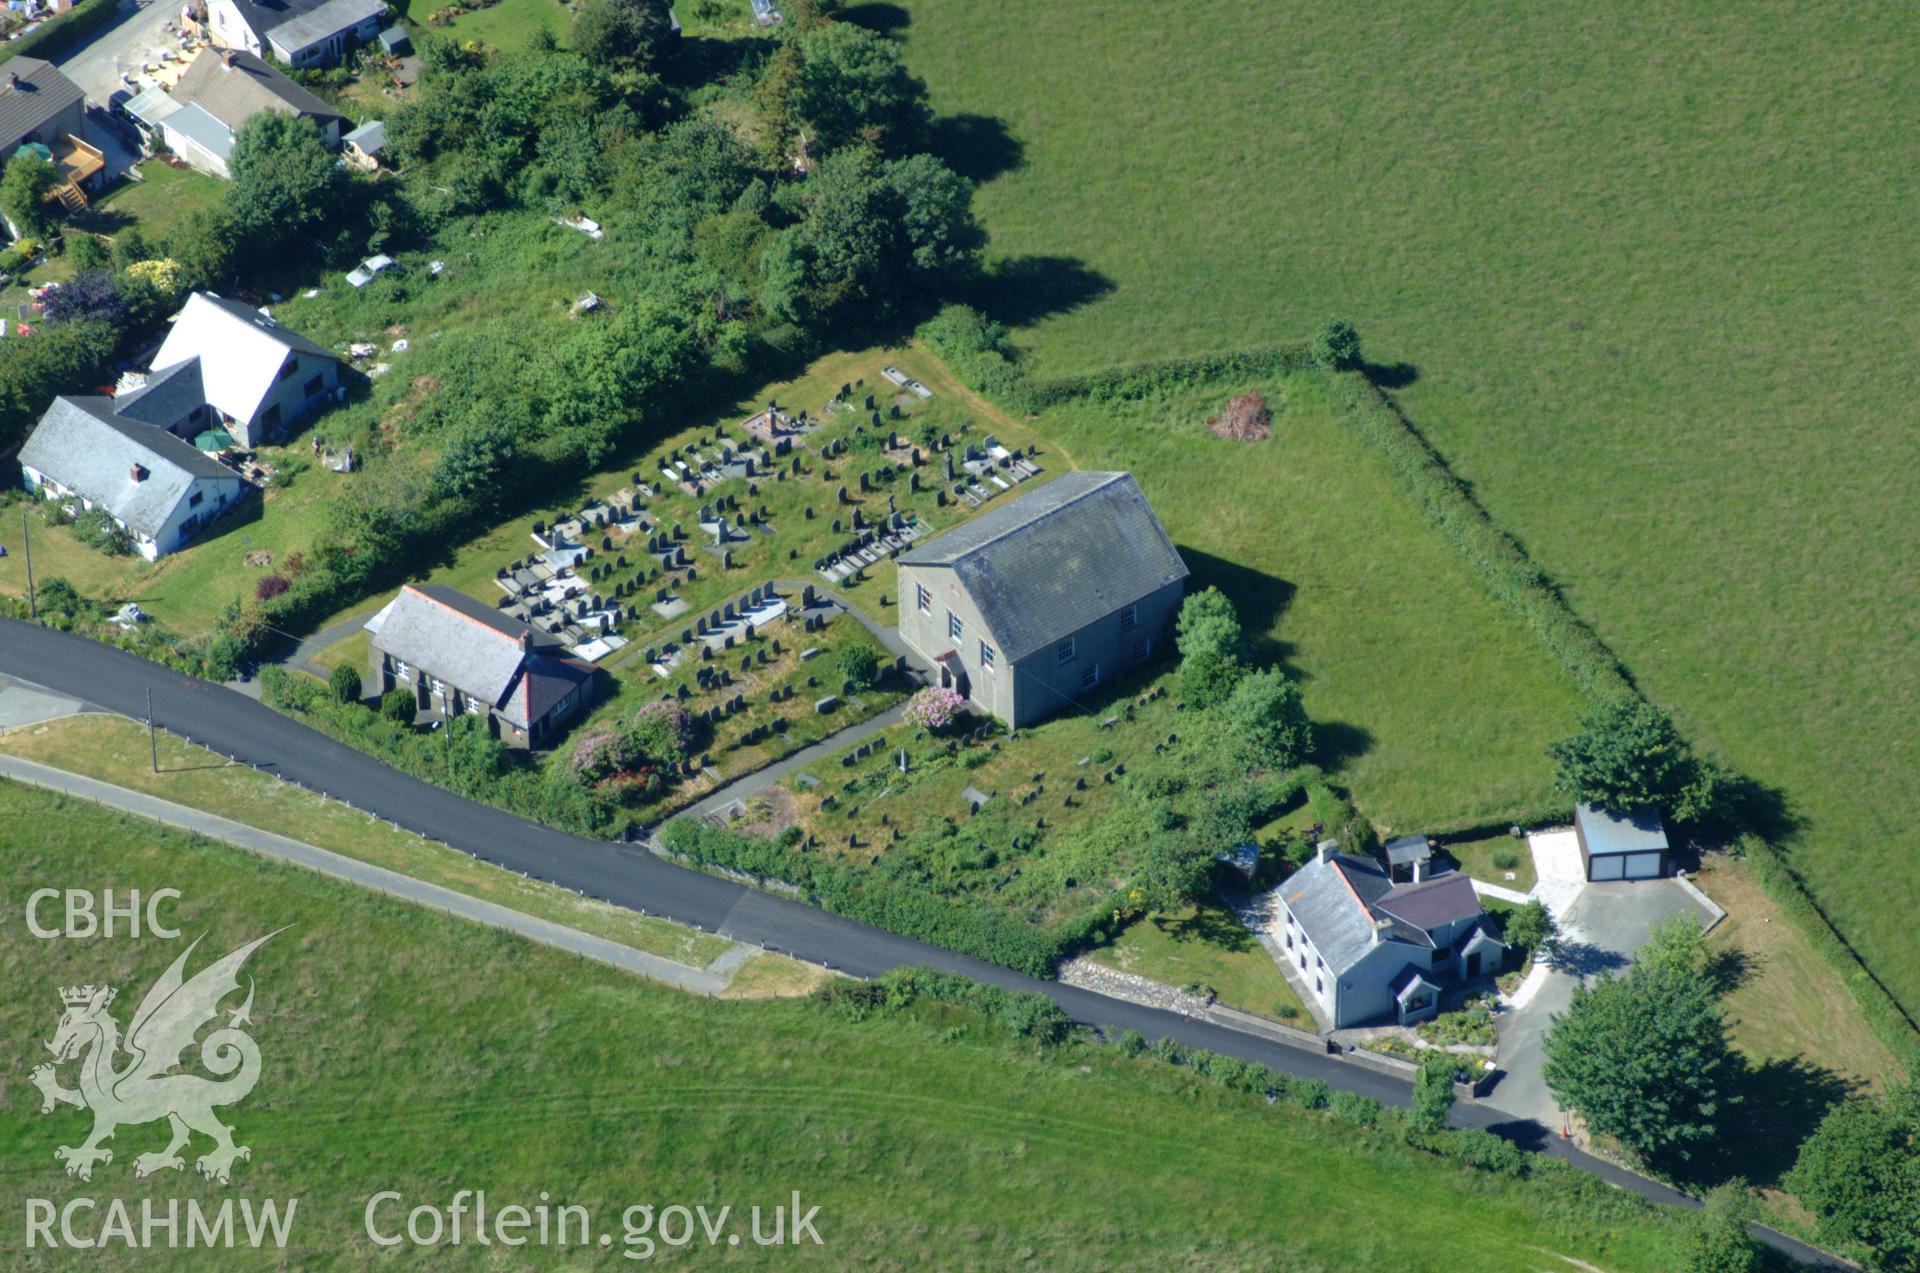 RCAHMW colour oblique aerial photograph of Horeb Welsh Baptist Church, Penrhyn-coch taken on 14/06/2004 by Toby Driver